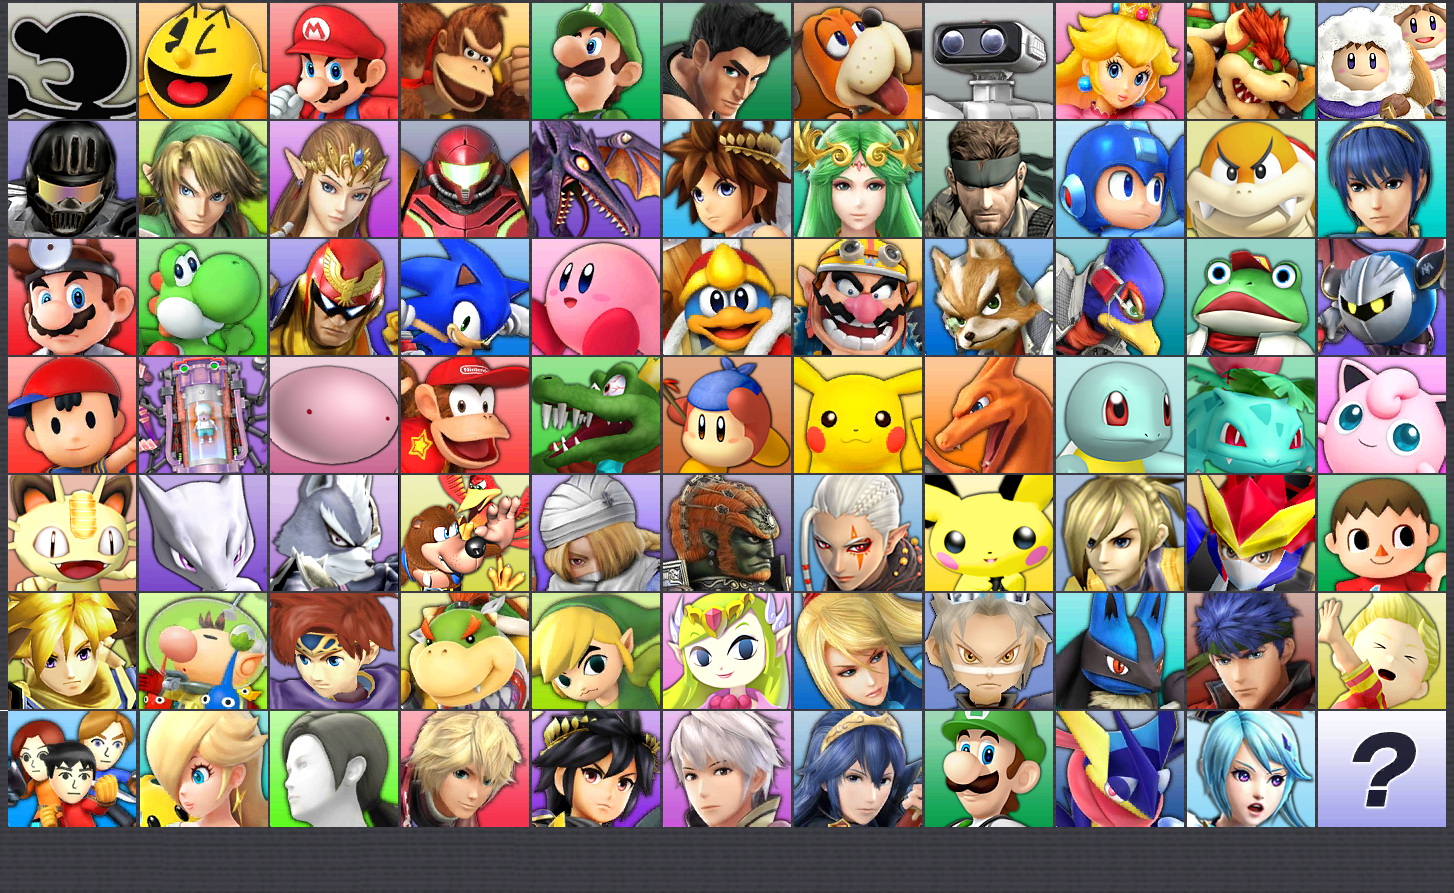 Smash Bros. for 3DS with 76 Characters (by debut)